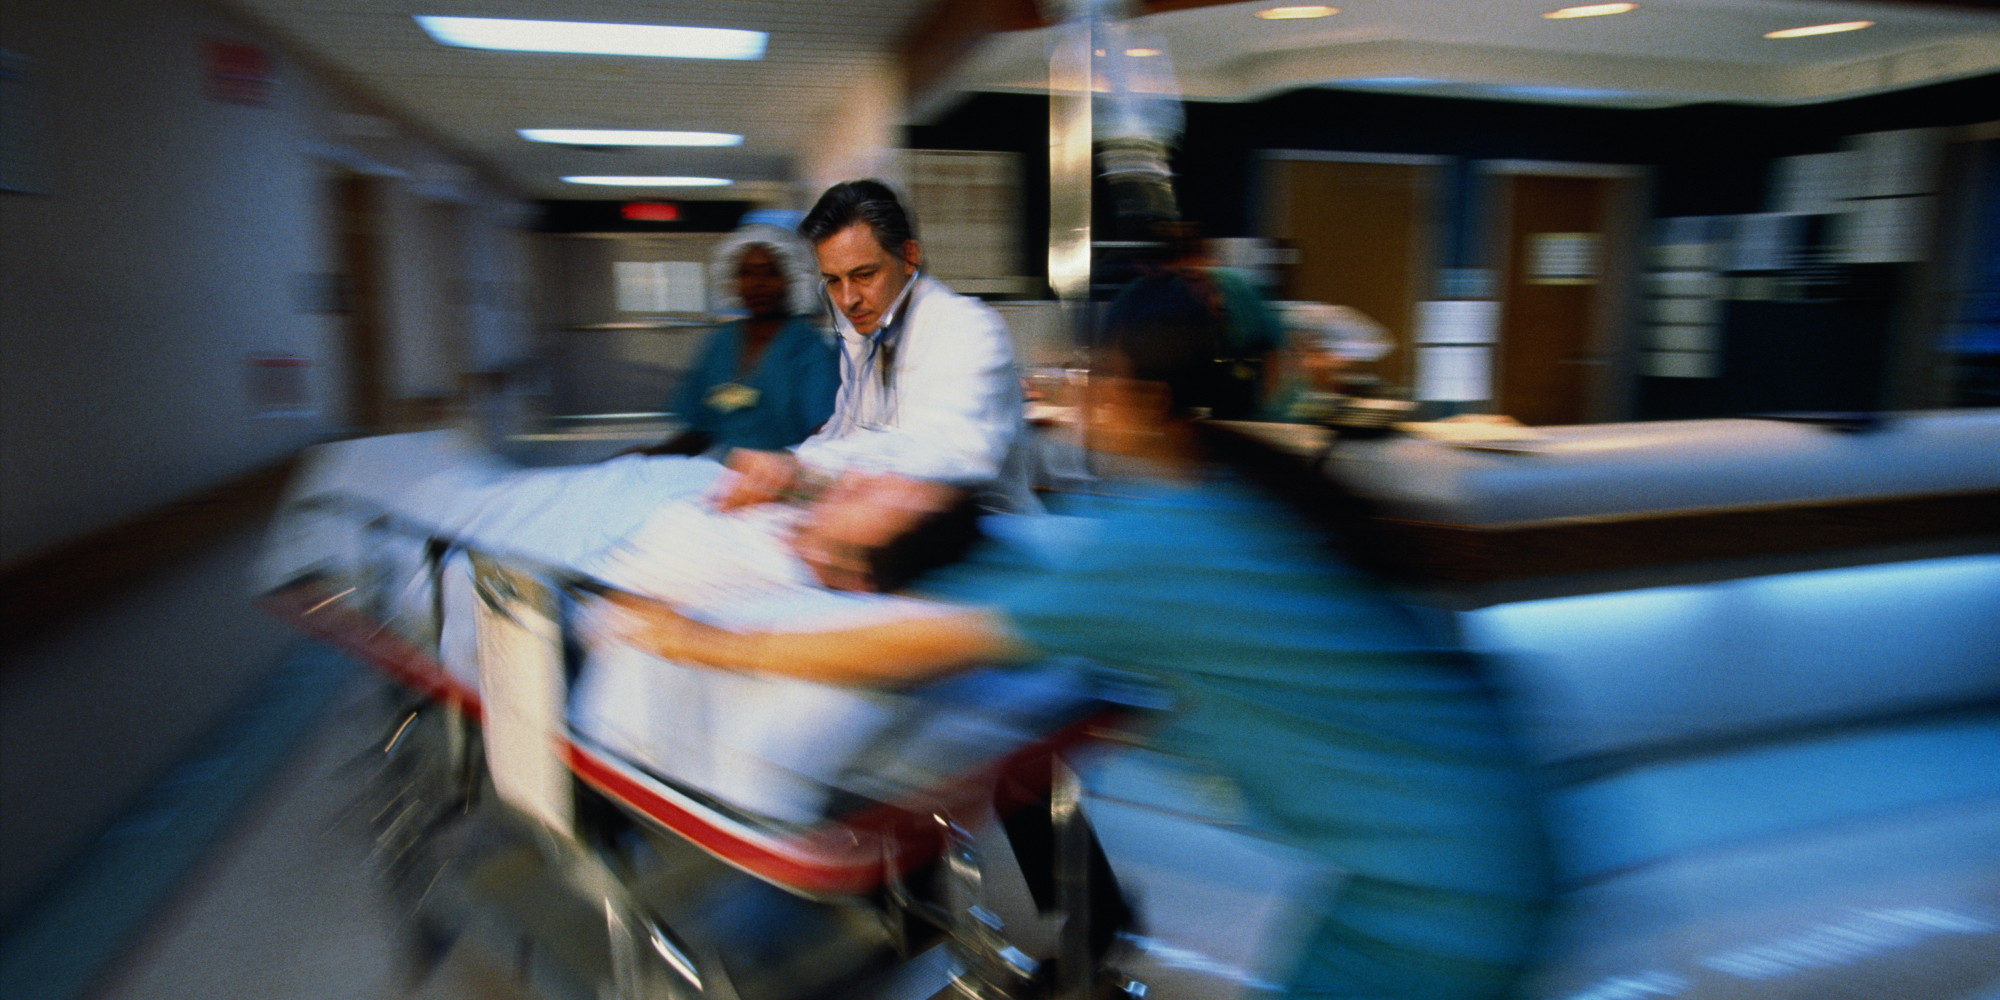 2014 State Rankings Released For Support For Emergency Care | HuffPost